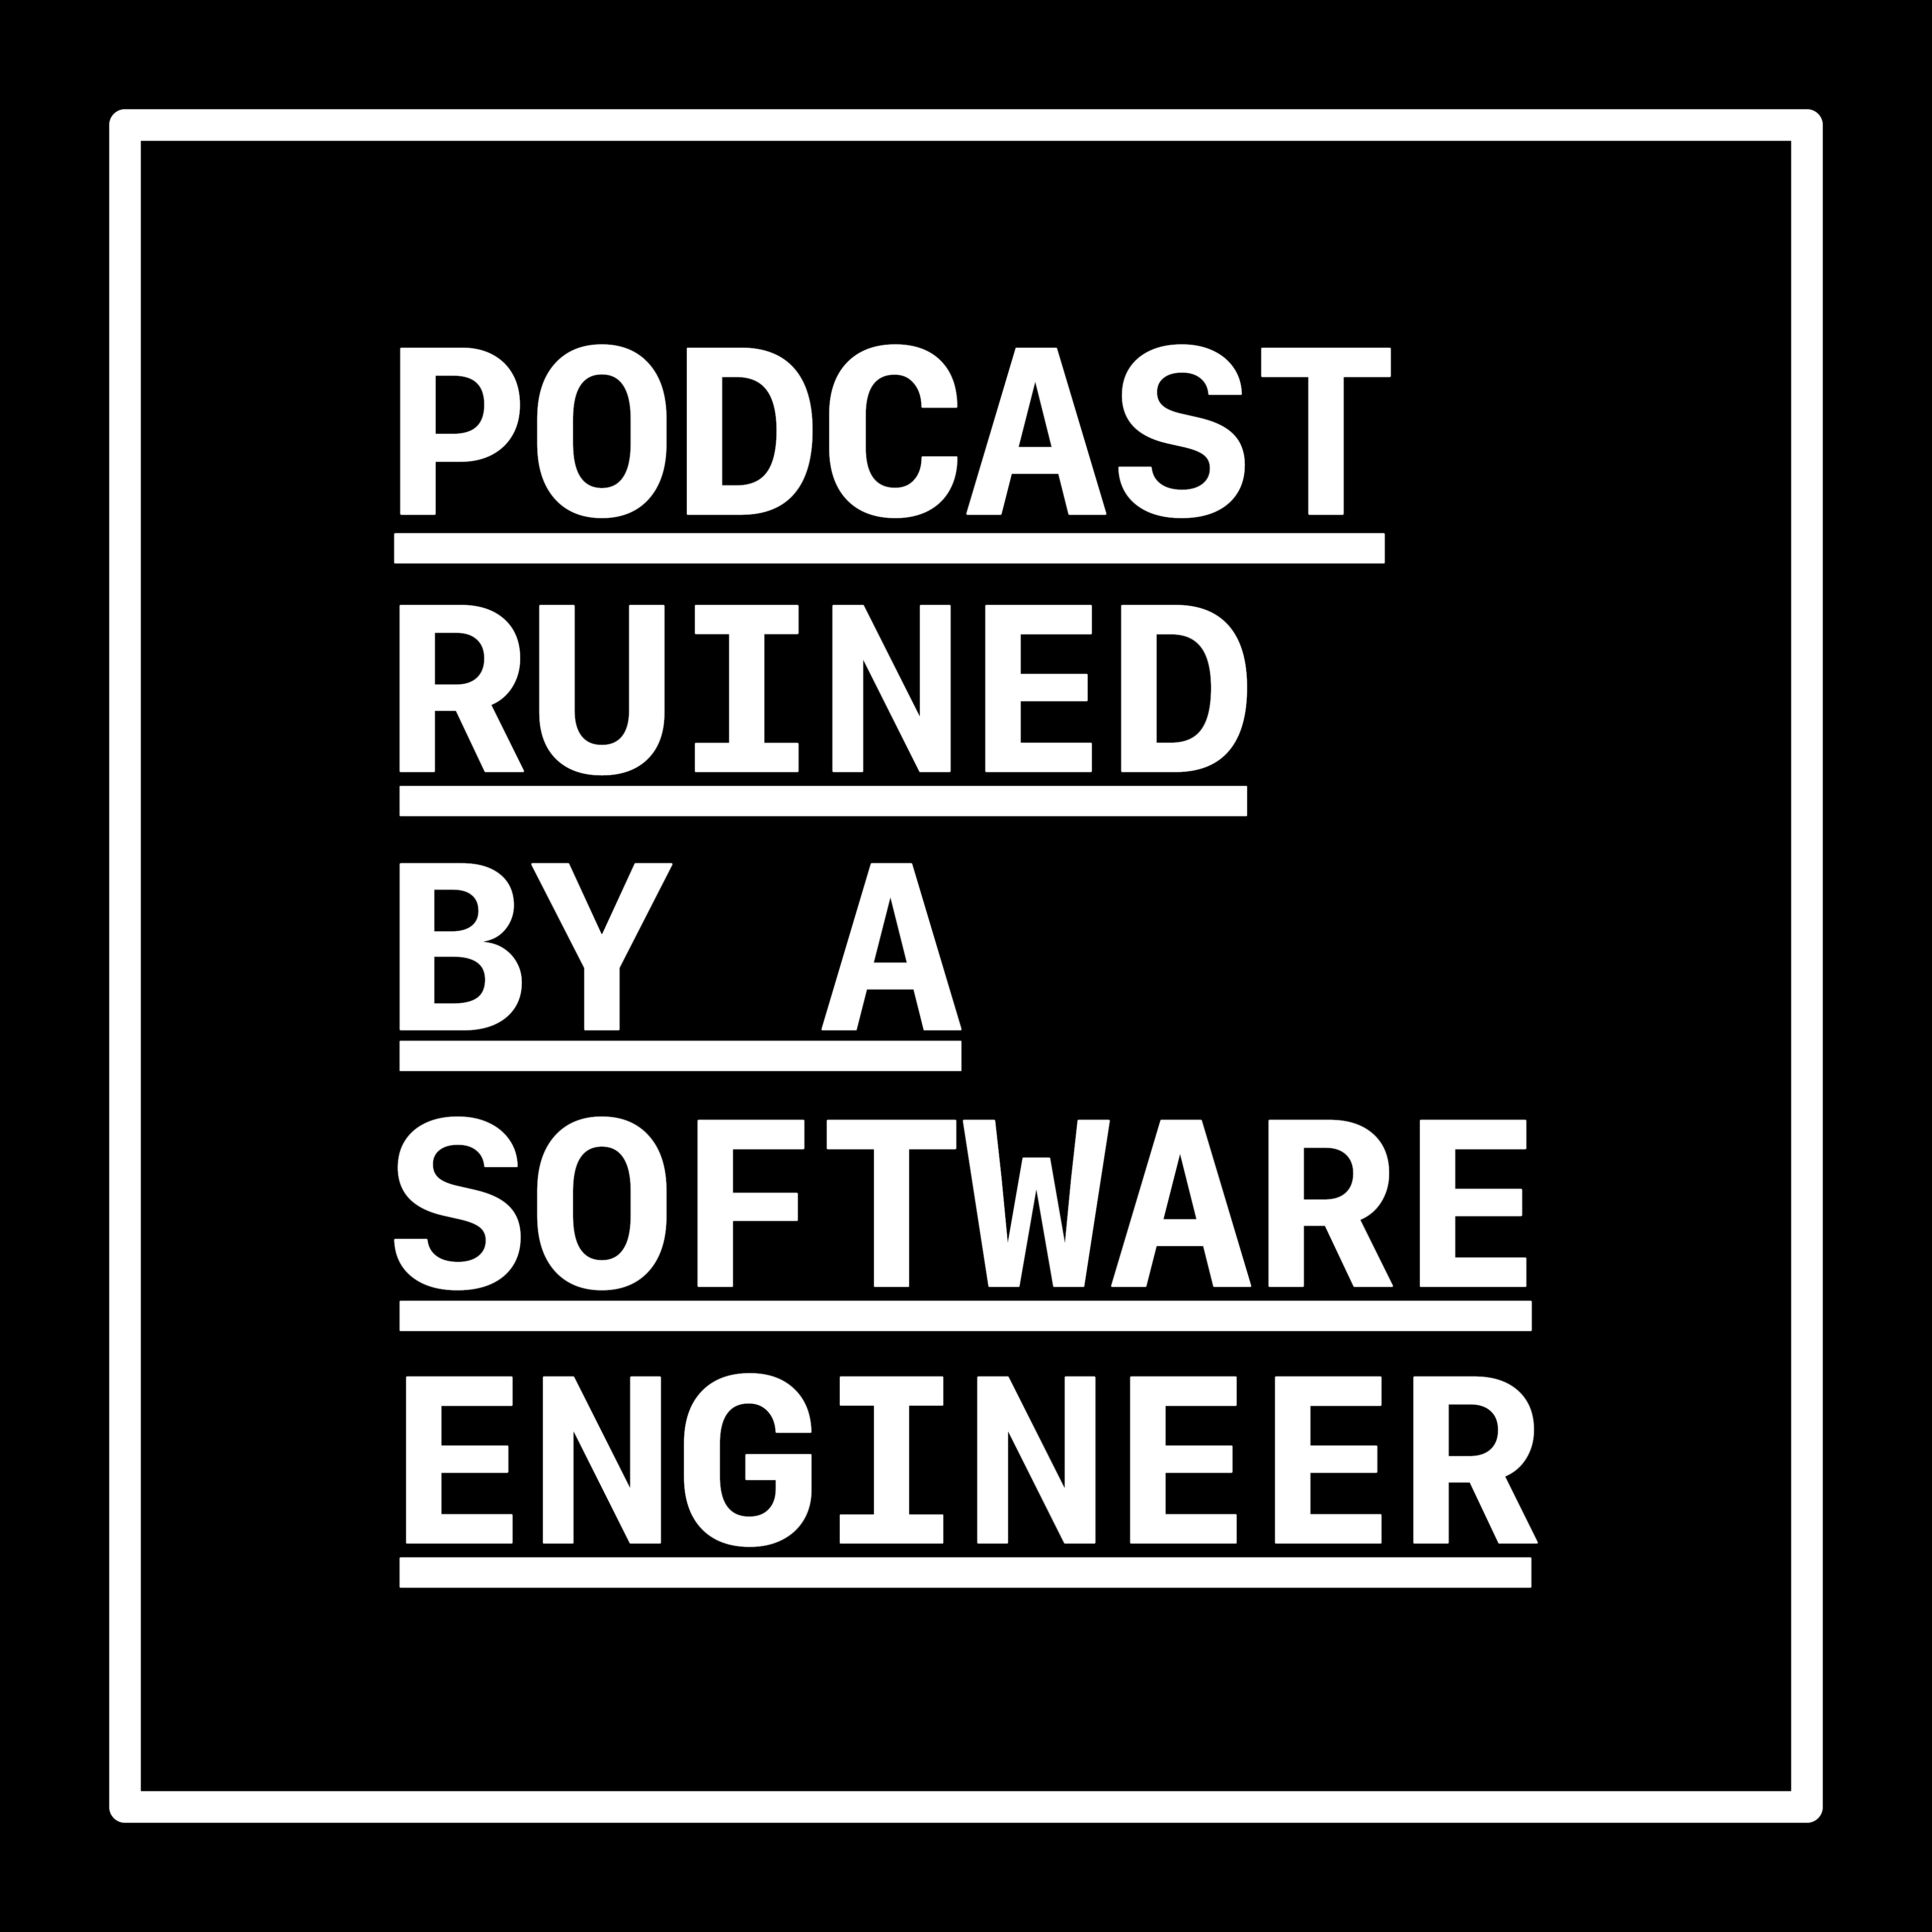 Podcast Ruined by a Software Engineer